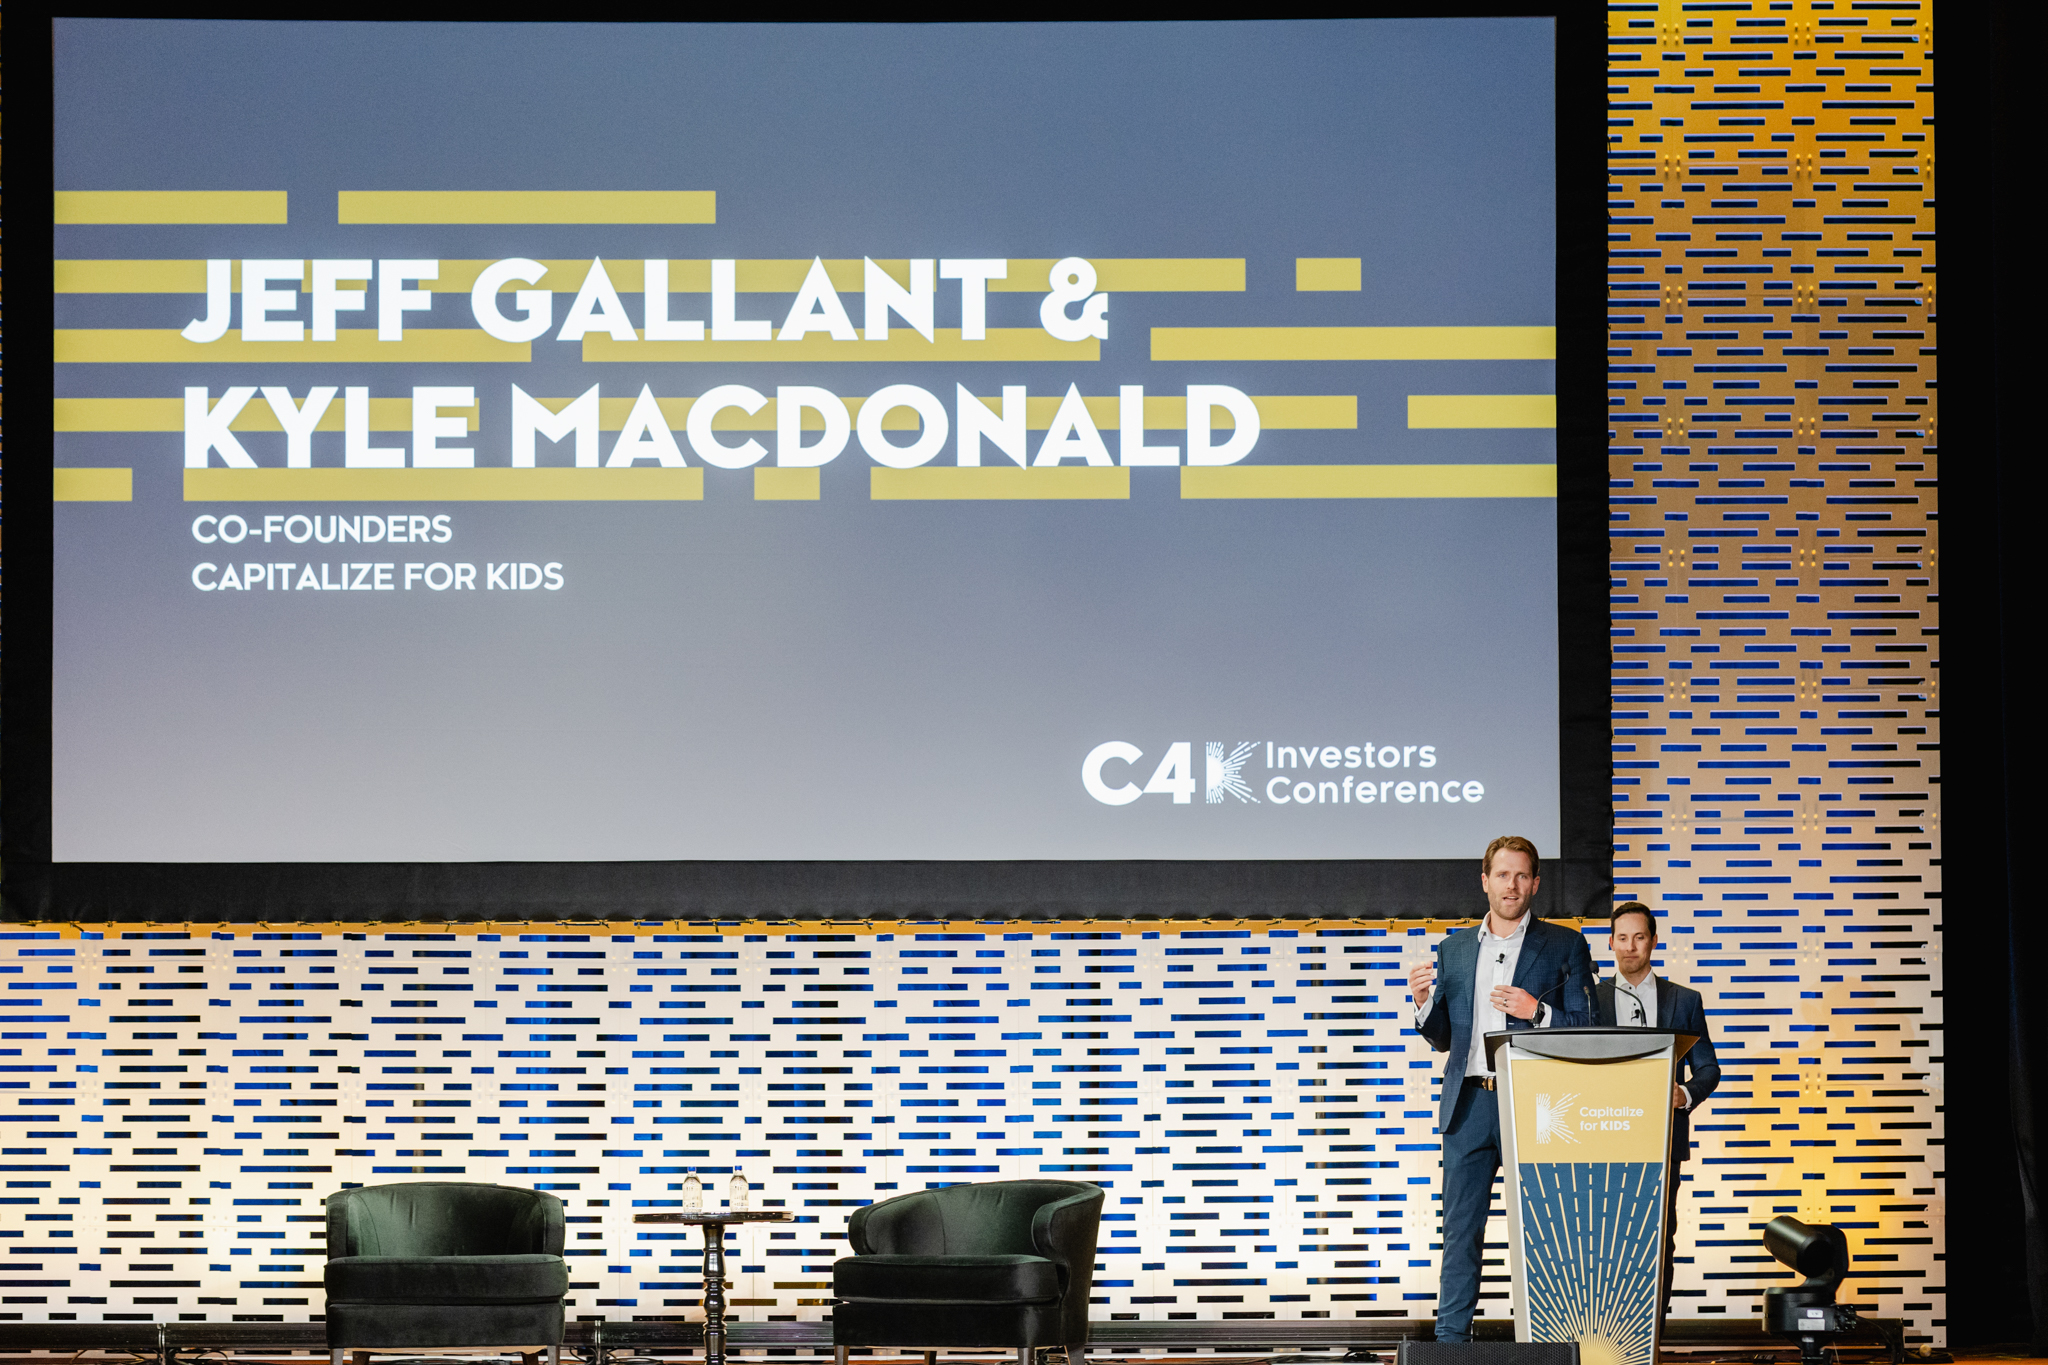 Jeff gallant & kyle macdonald on stage at the conference.